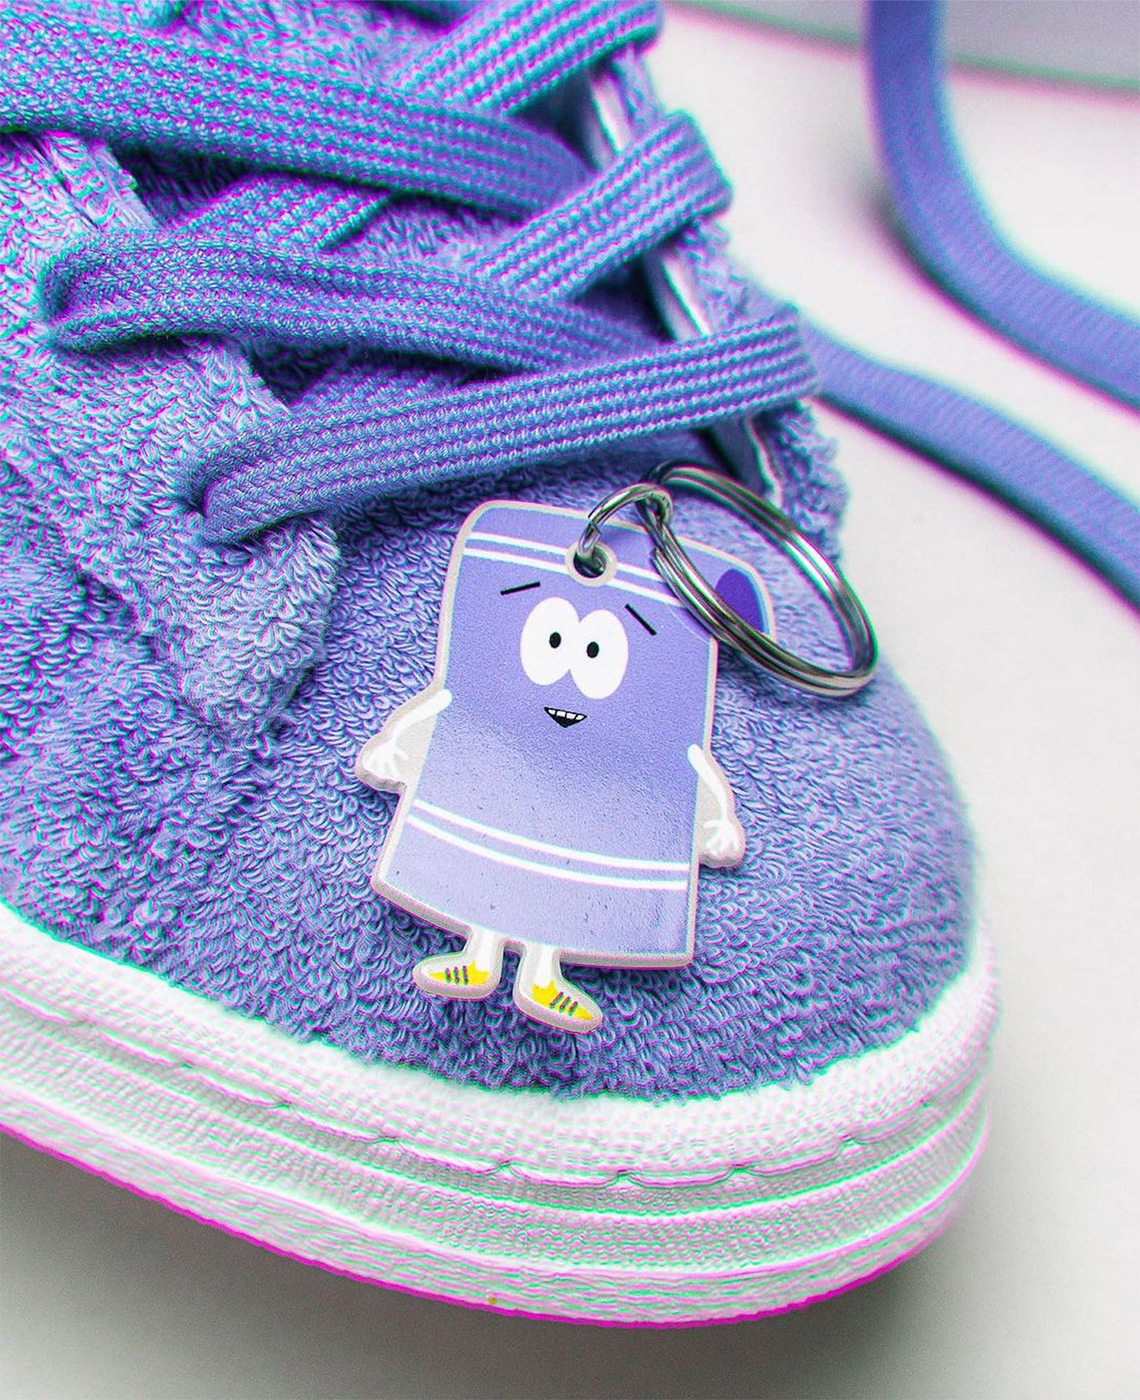 Towelie track adidas South Park Shoes Release Date 2